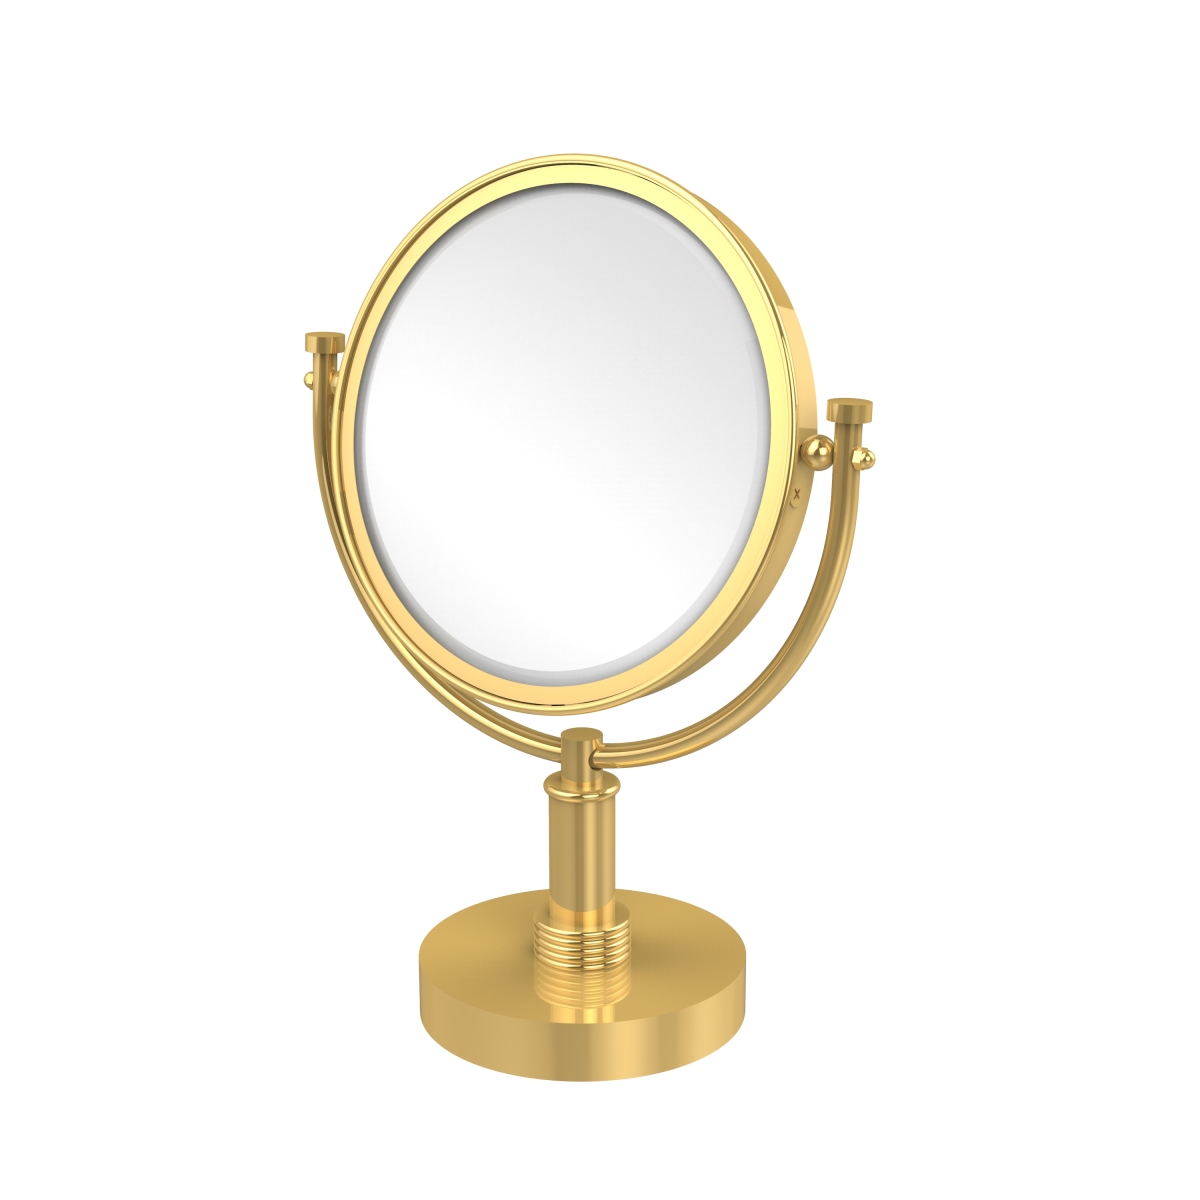 Picture of Allied Brass DM-4G-2X-UNL Grooved Ring Style 8 in. Vanity Top Make-Up Mirror 2X Magnification, Unlacquered Brass